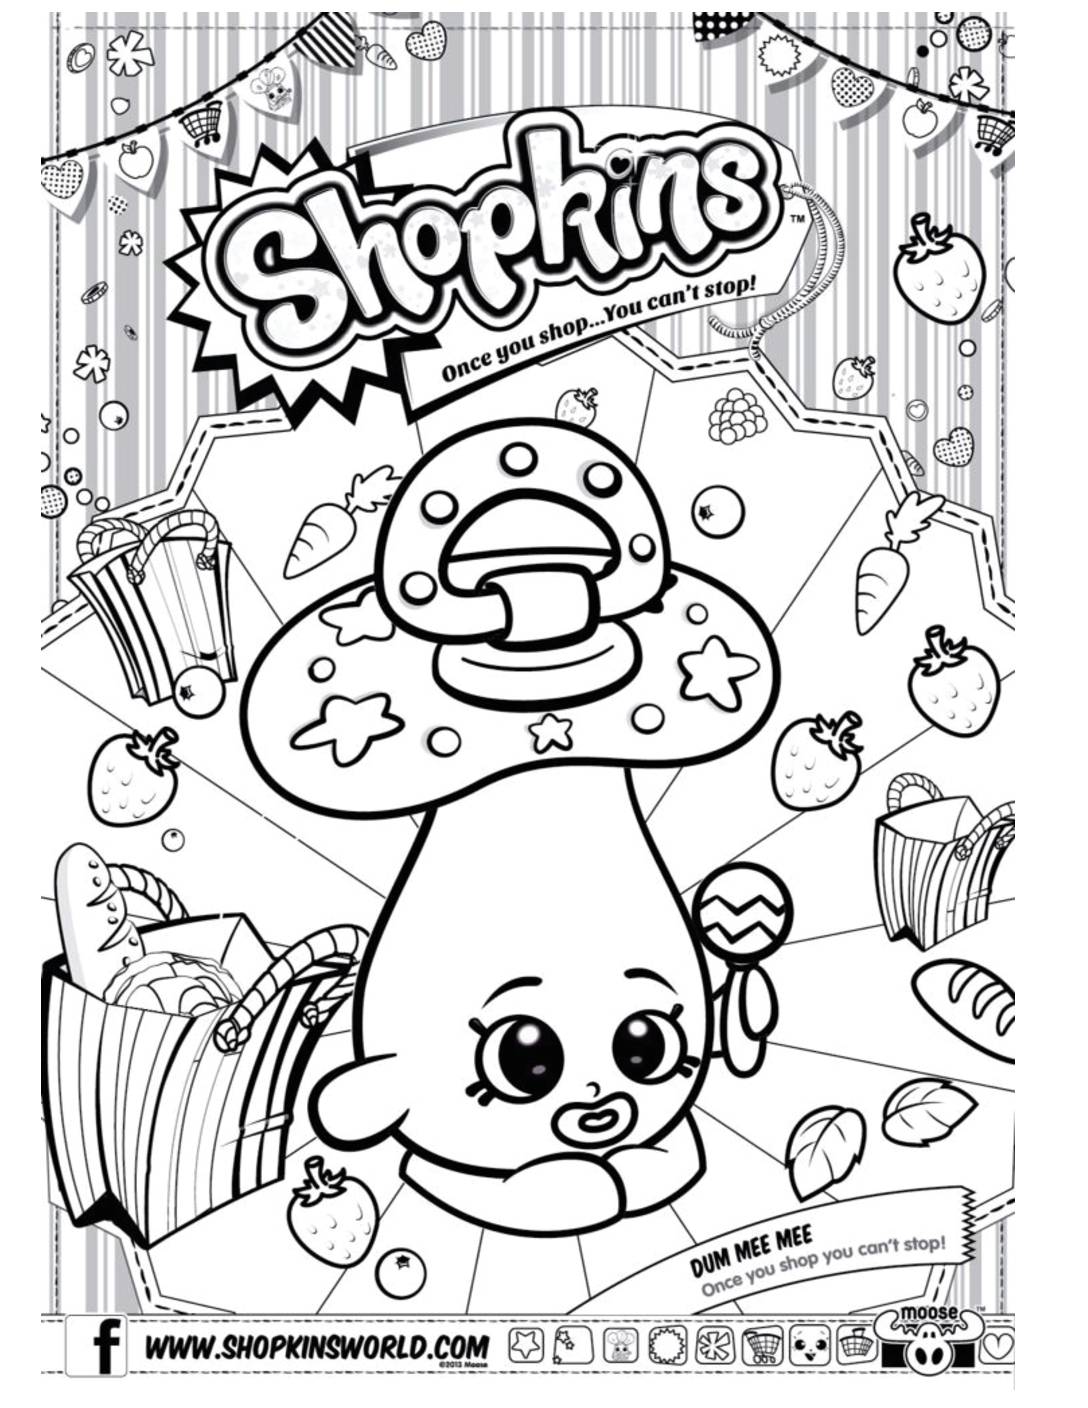 Shopkins Coloring Page 3